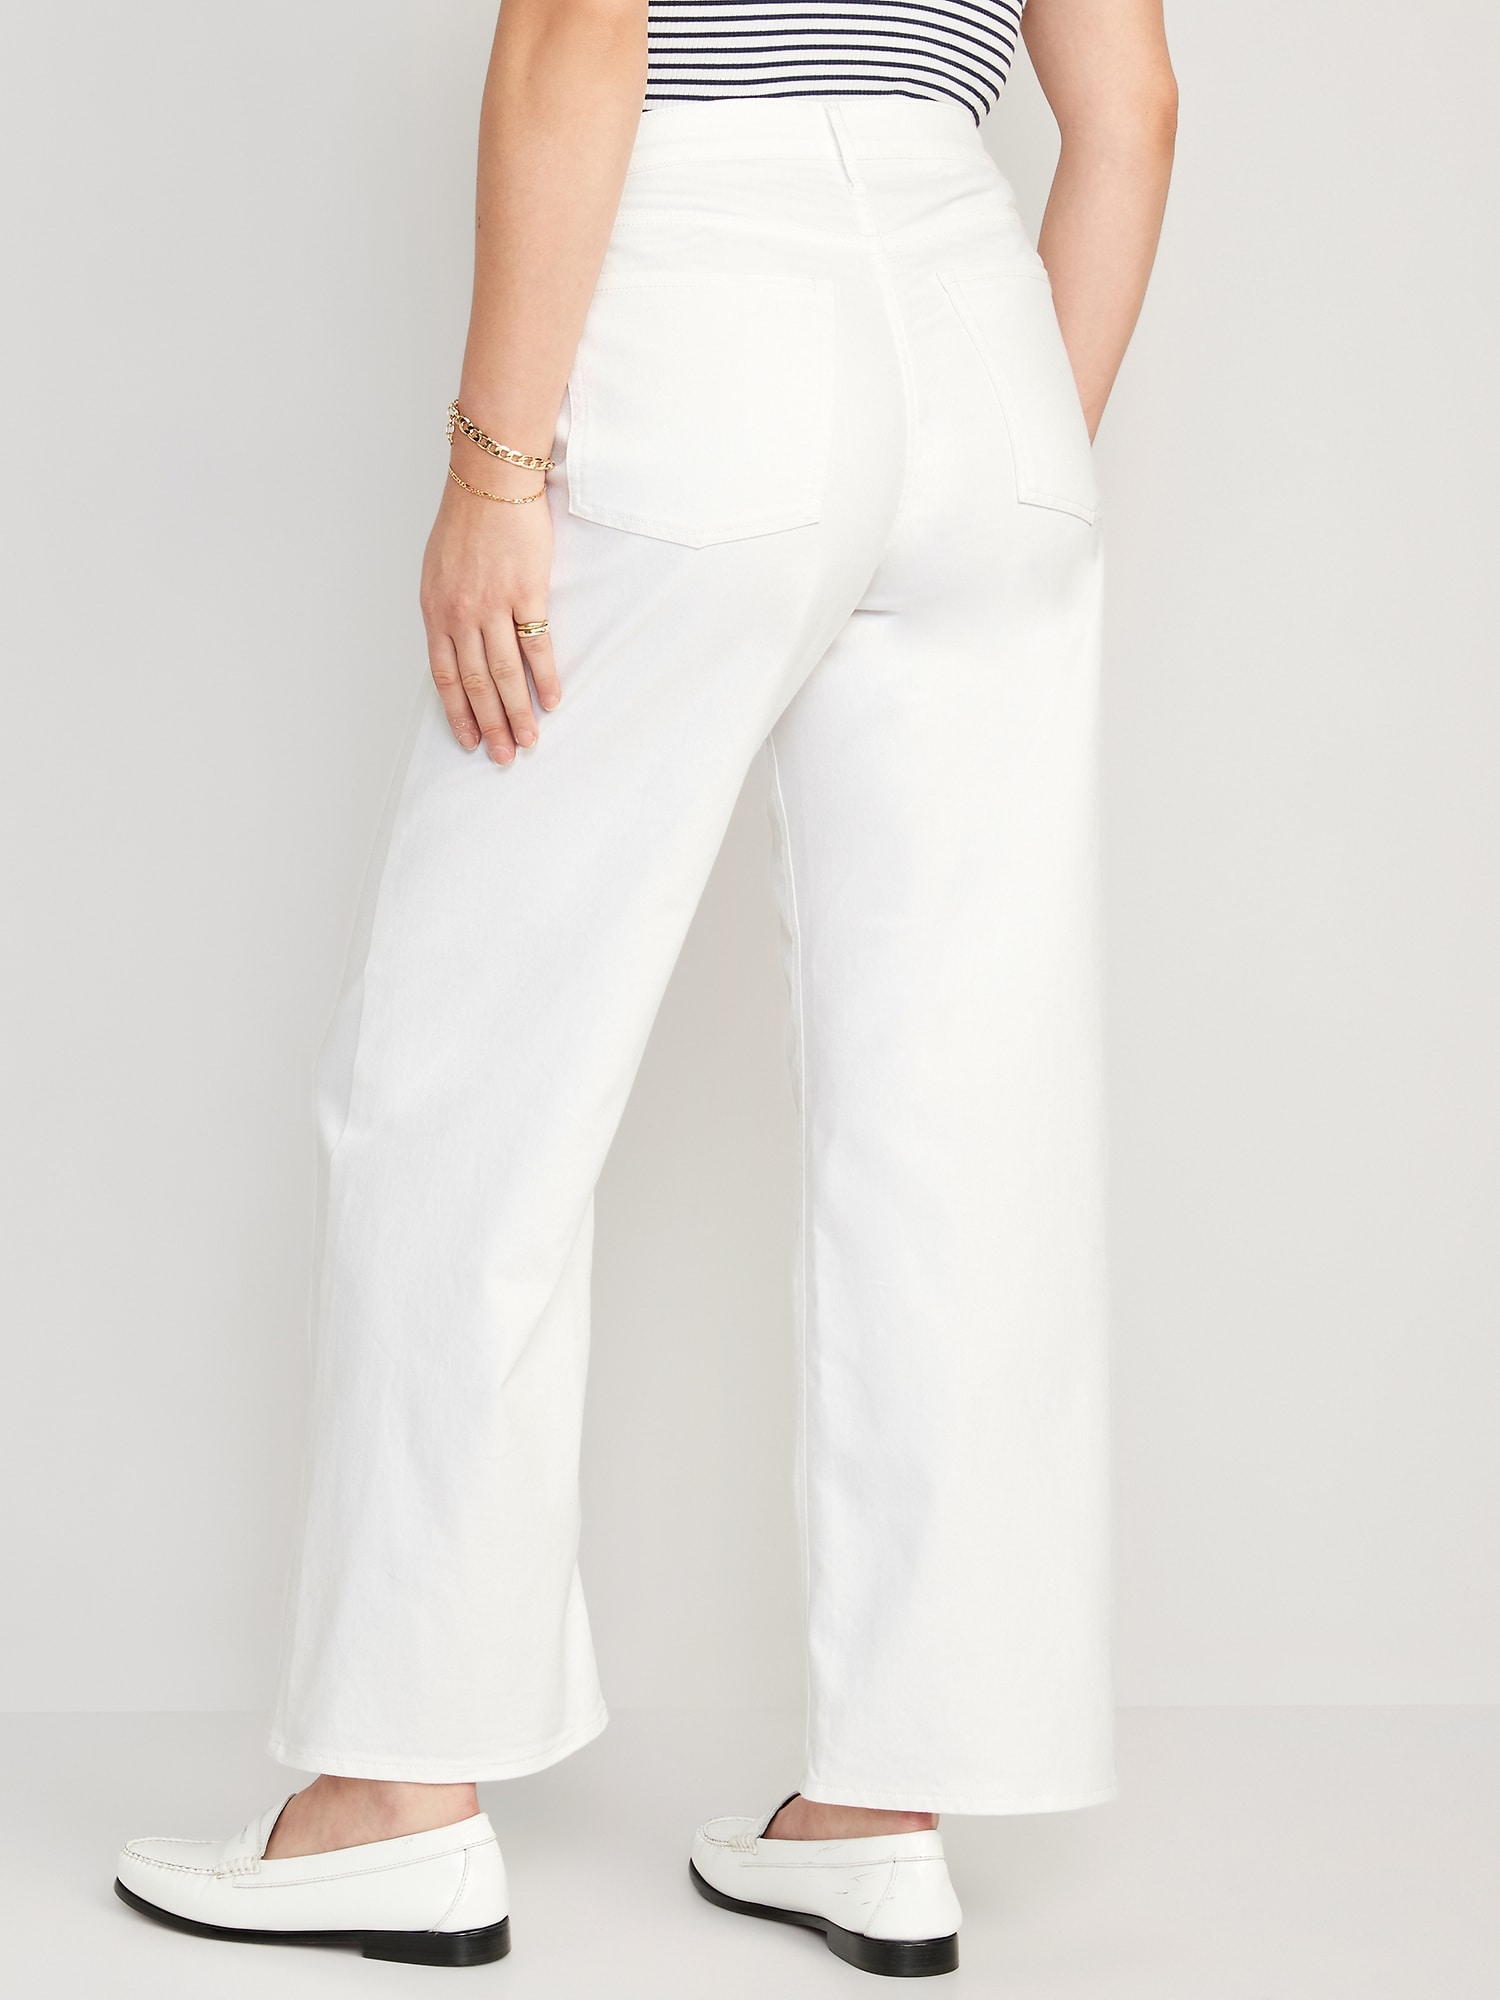 High-Waisted Solid White Women's Pant for Effortless Elegance!